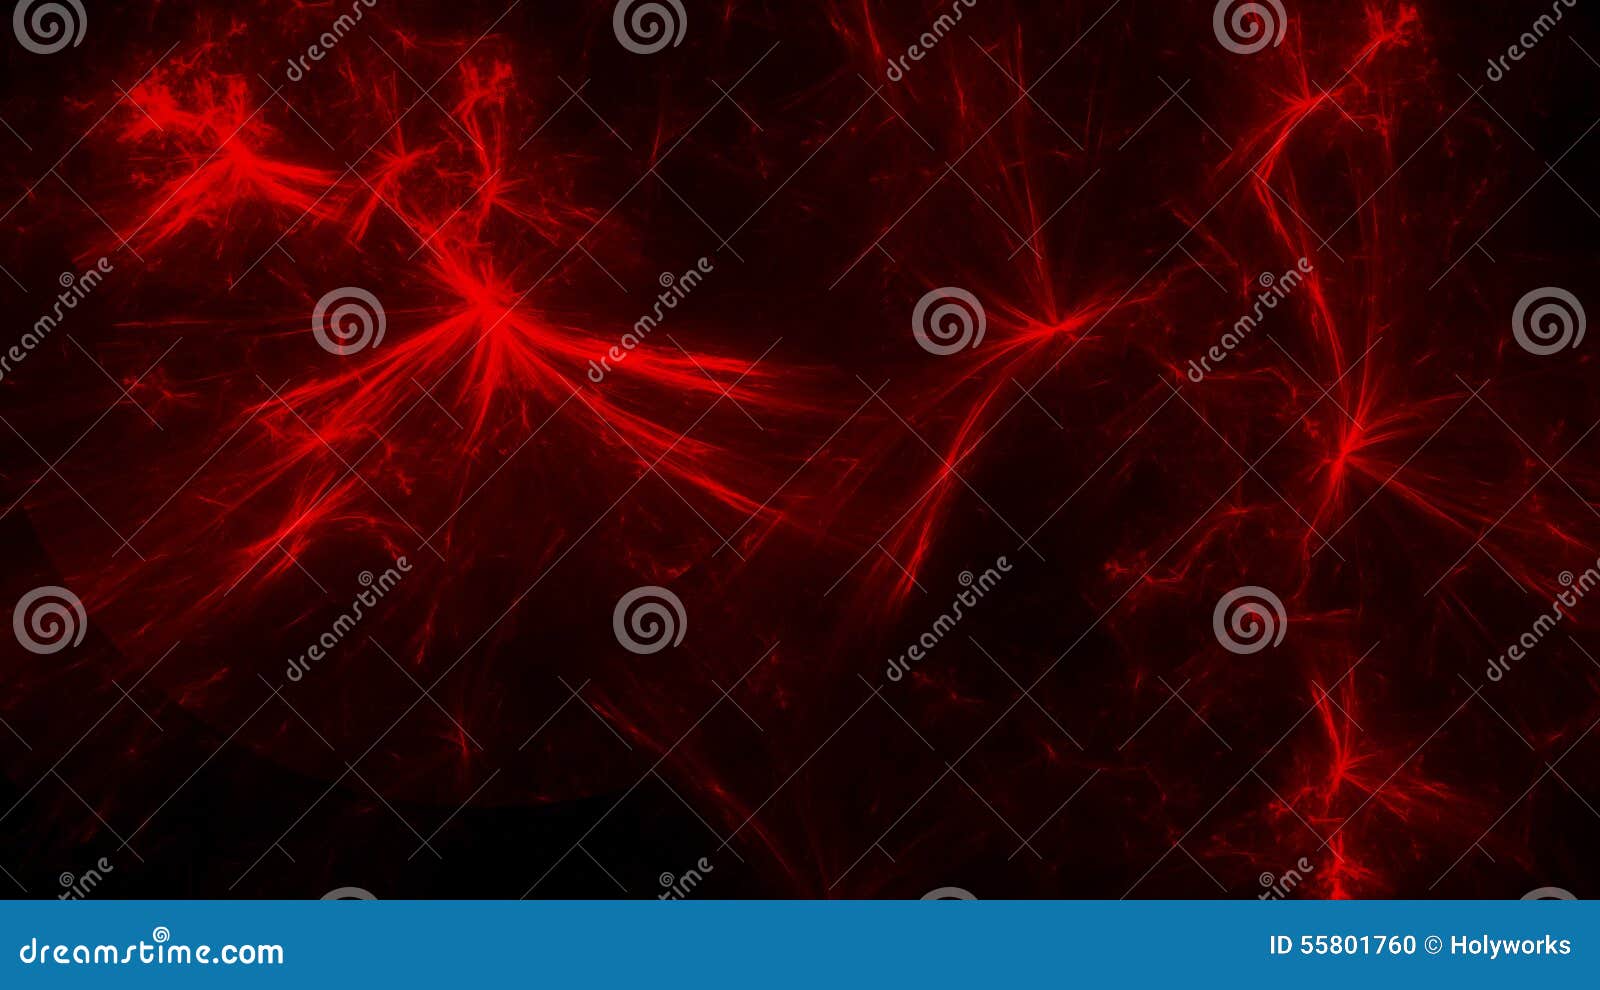 abstract dark background with saturated red color